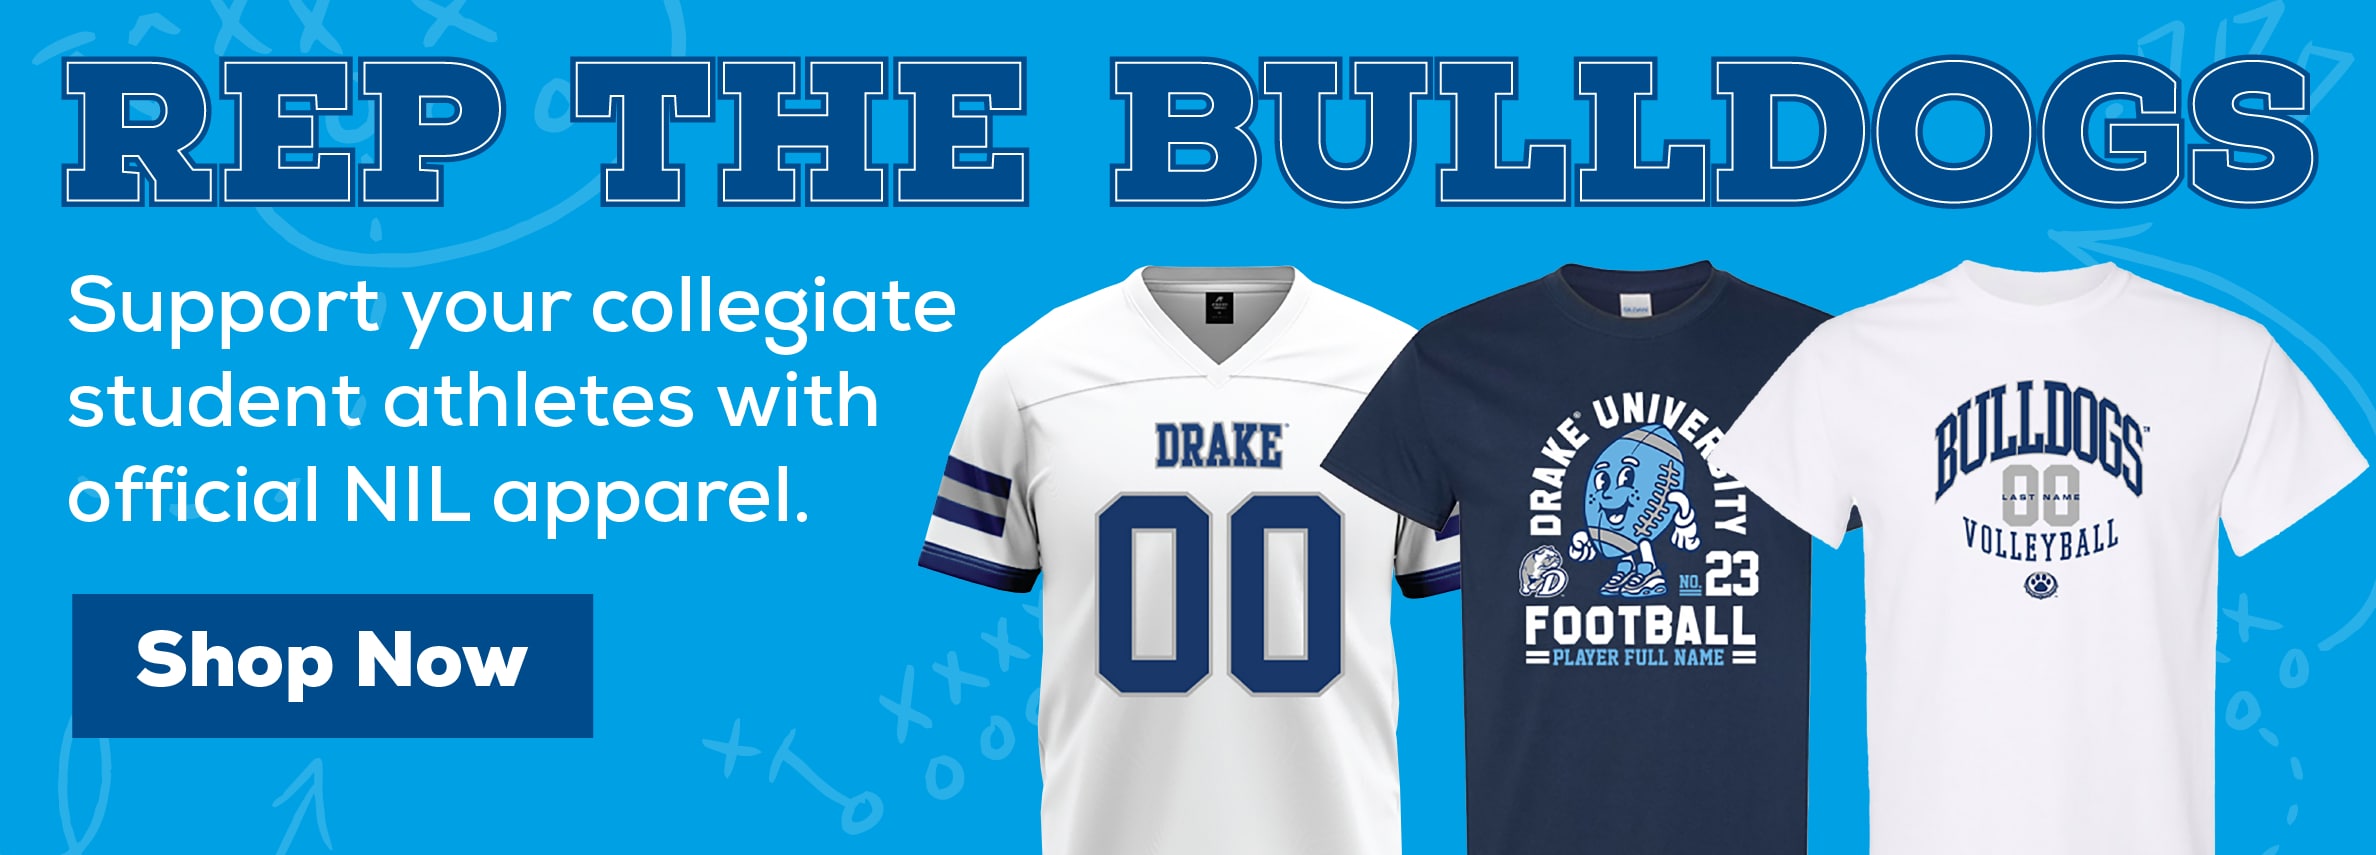 REP THE BULLDOGS Support your collegiate student athletes with official NIL apparel. Shop Now (new tab)